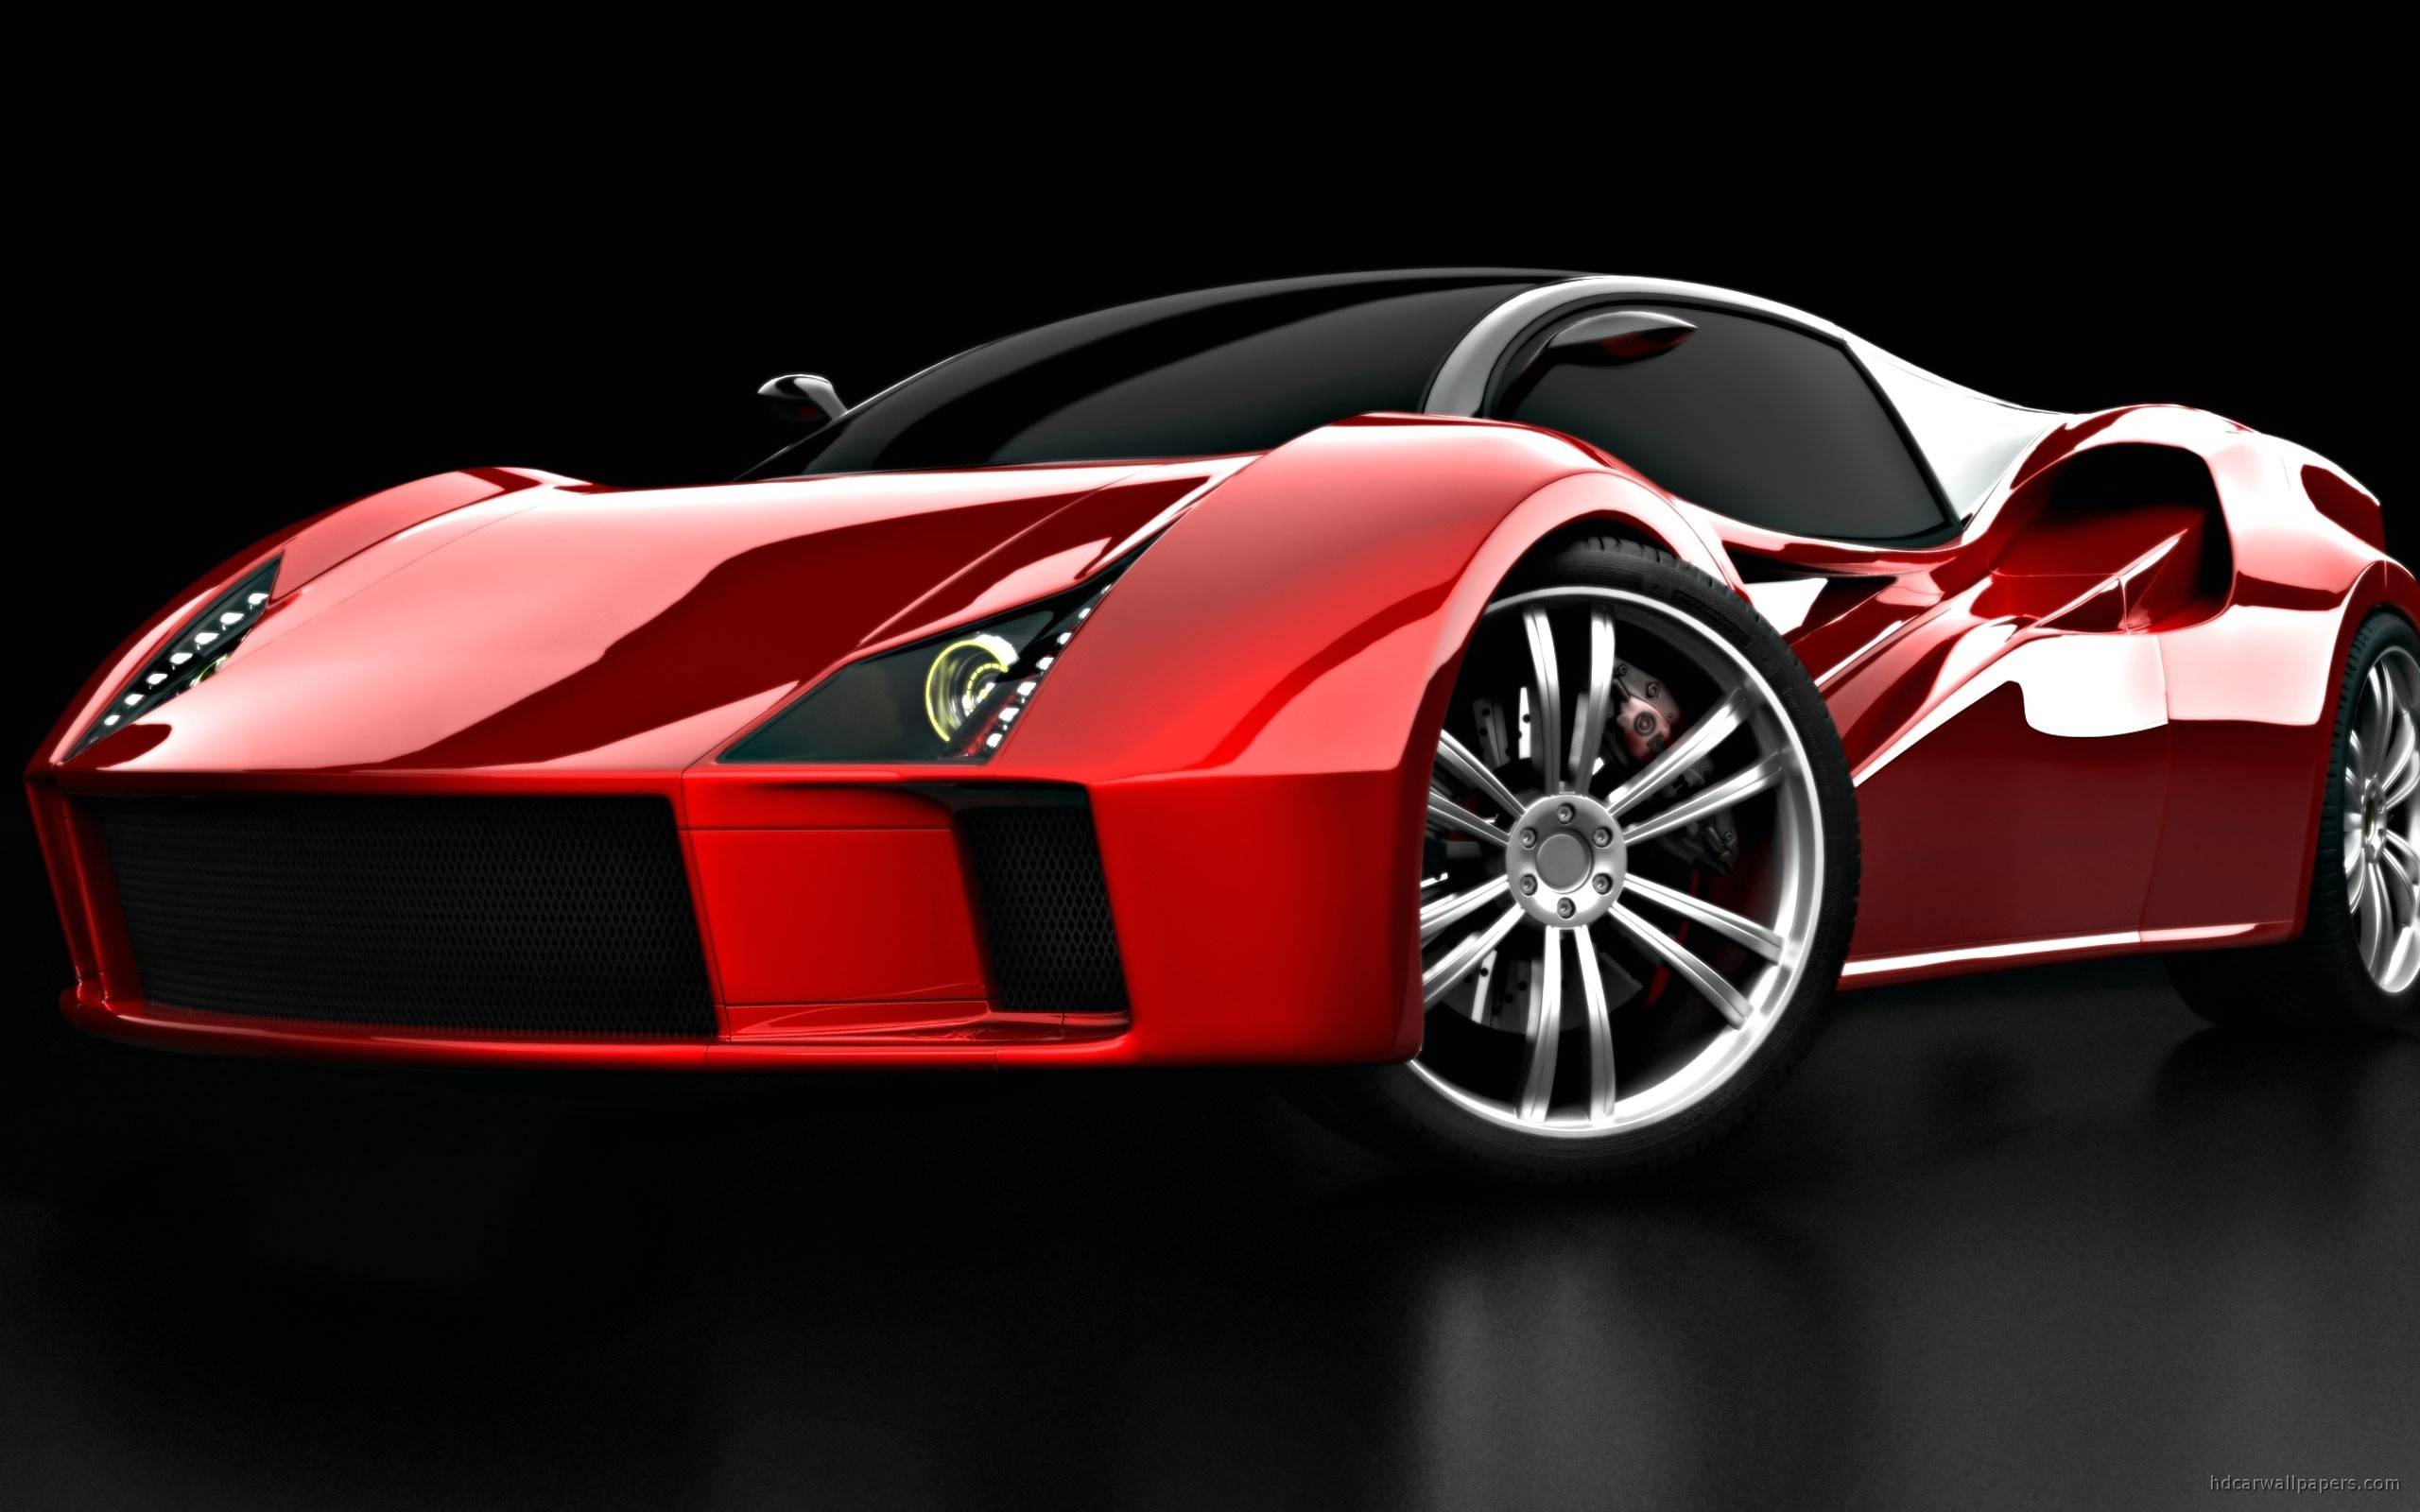 Pc Wallpaper HD Full Size Cars Pics Widescreen Desktop Page Of With